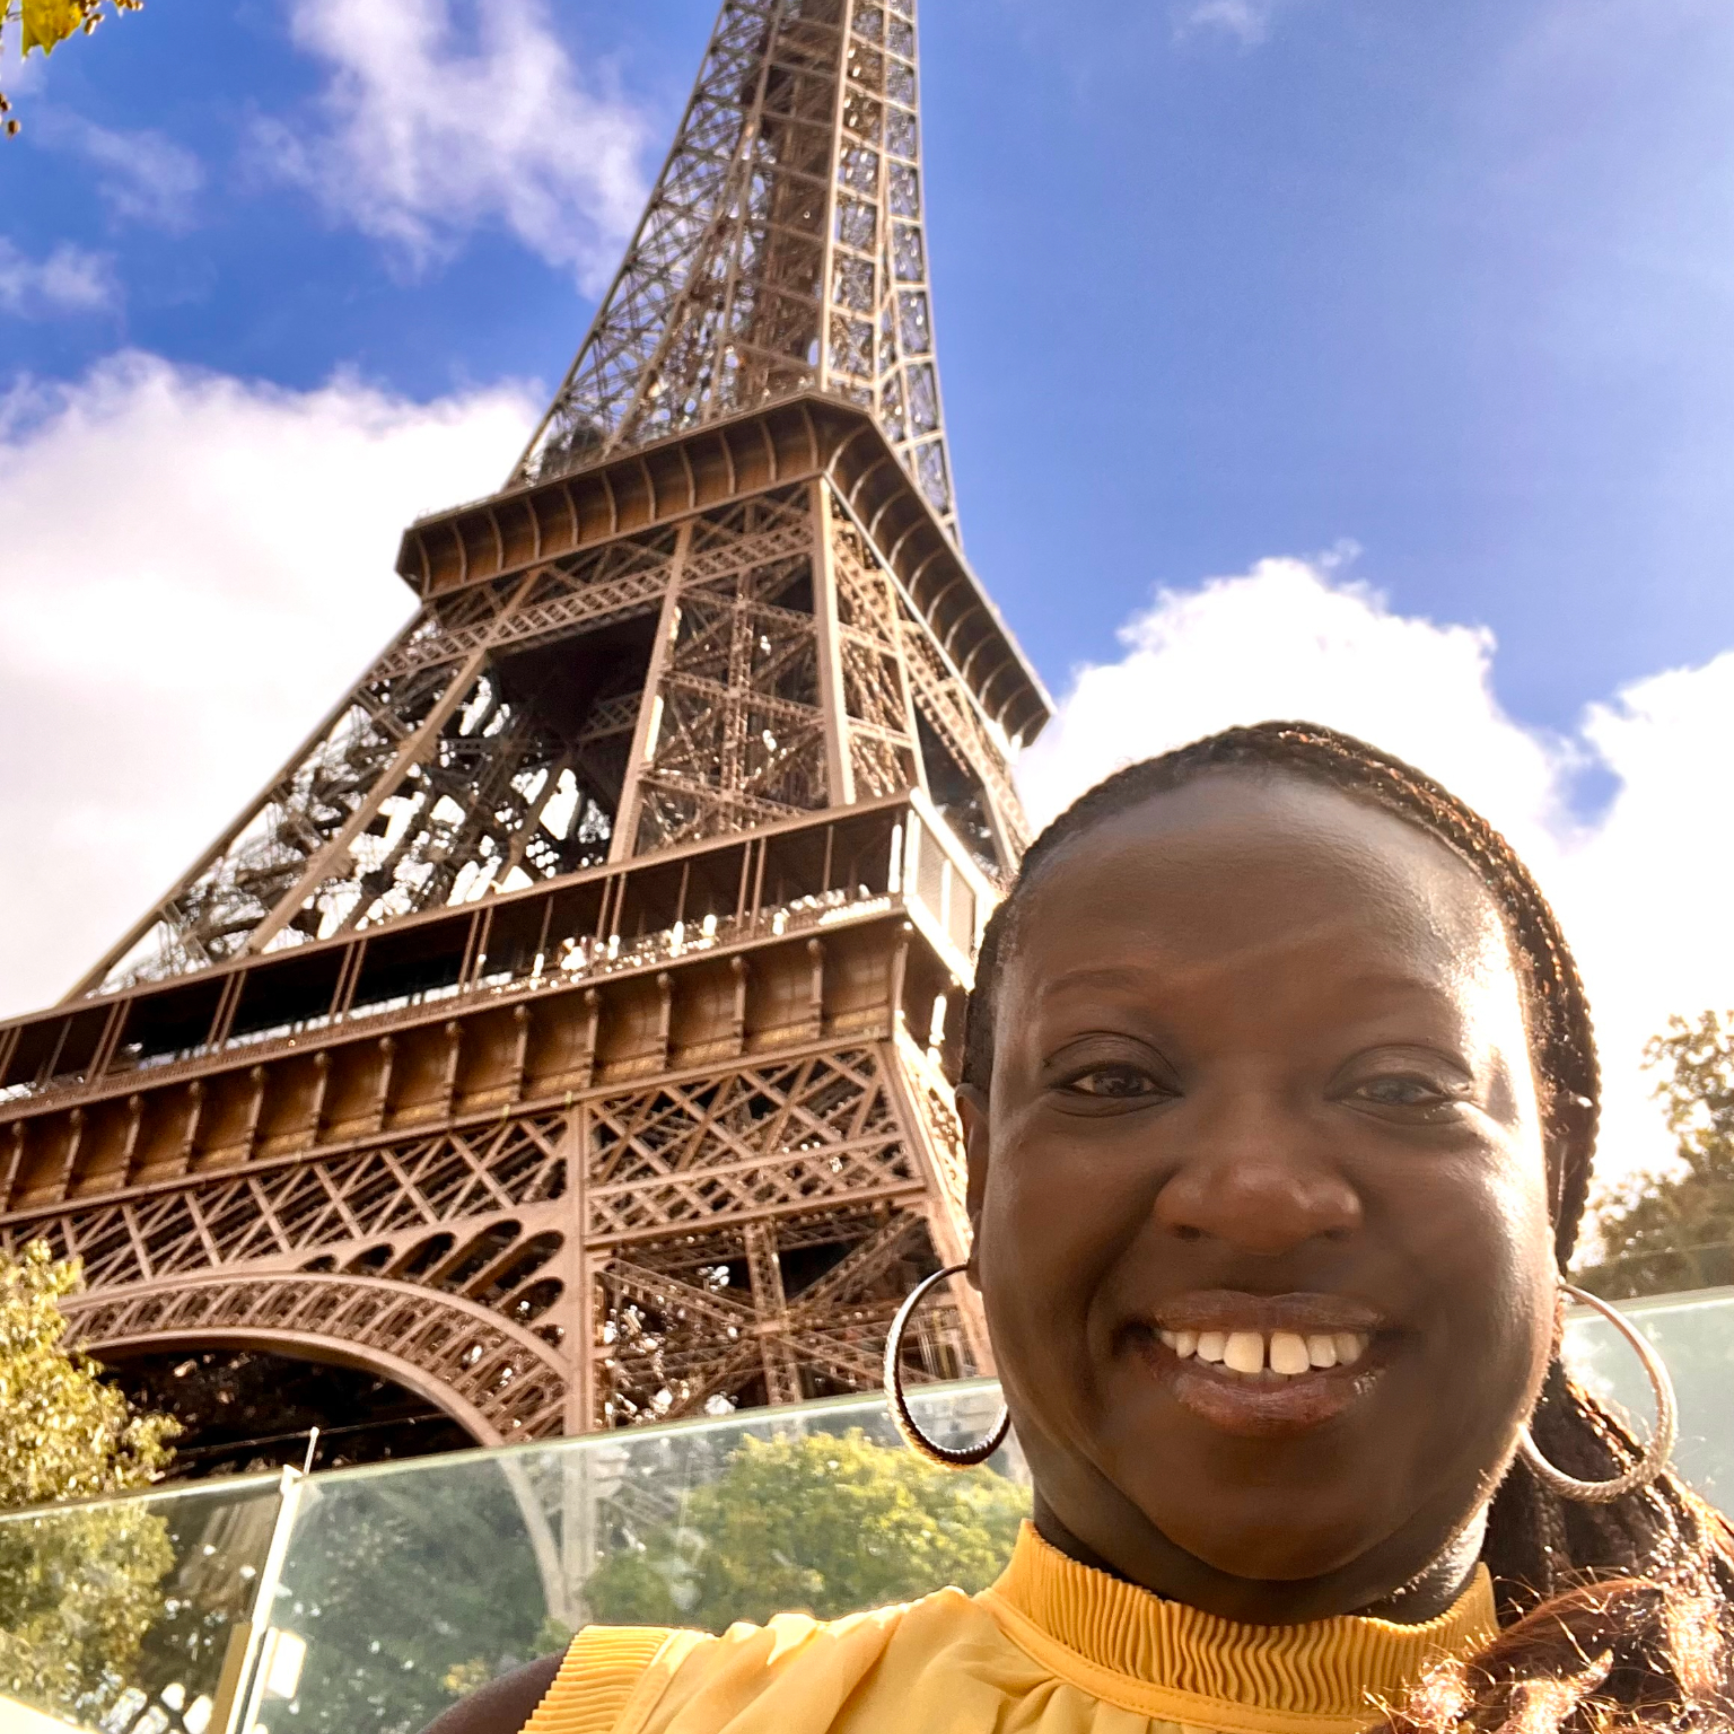 Snapshot in front of the Eiffel Tower during my amazing trip to Paris!